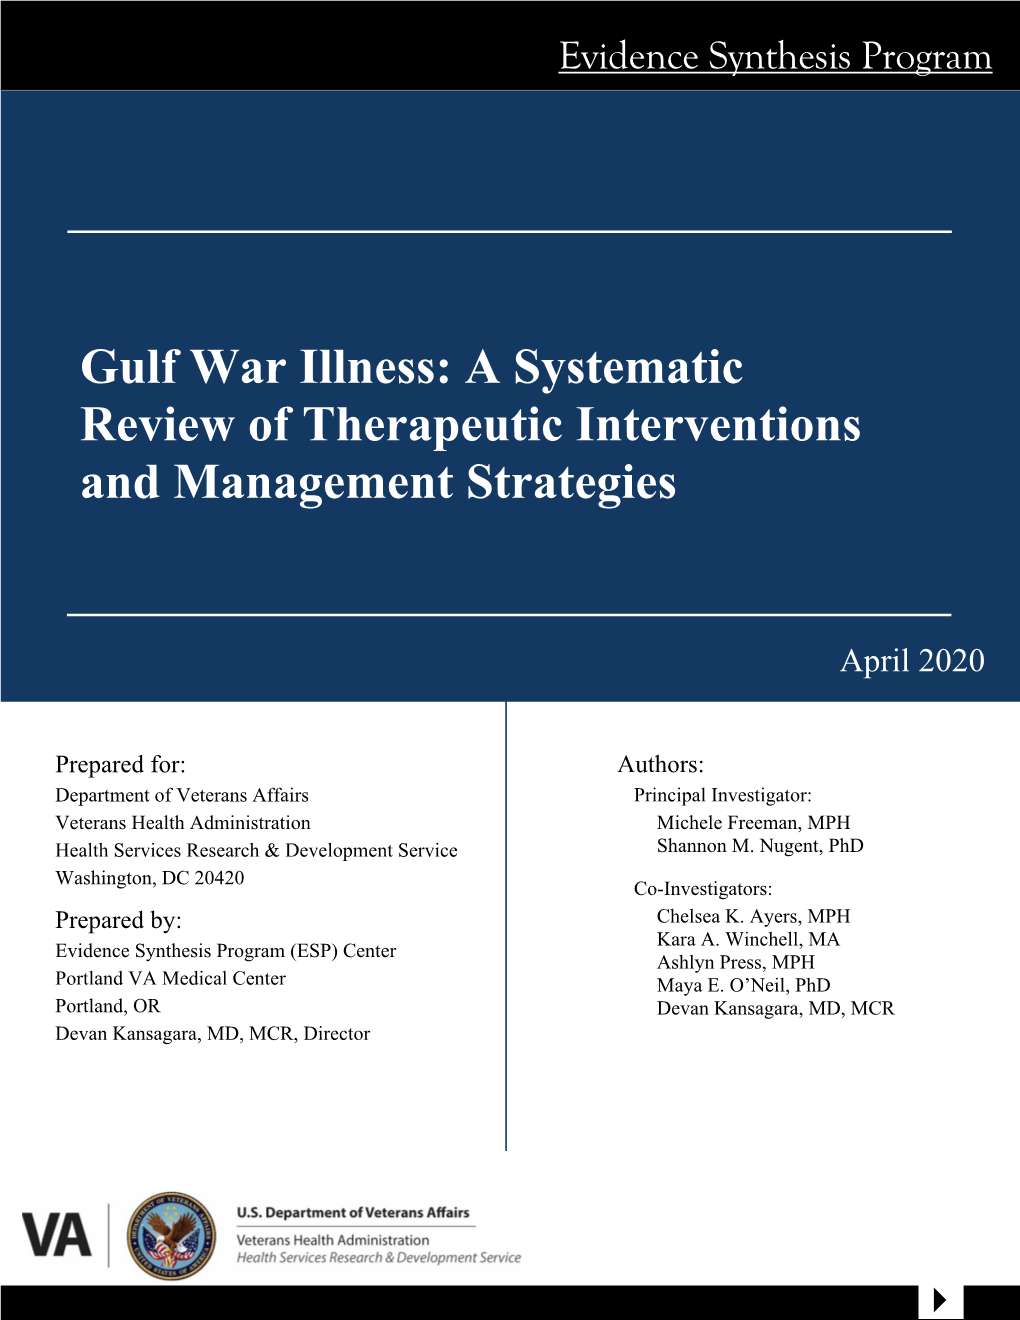 Gulf War Illness: a Systematic Review of Therapeutic Interventions and Management Strategies